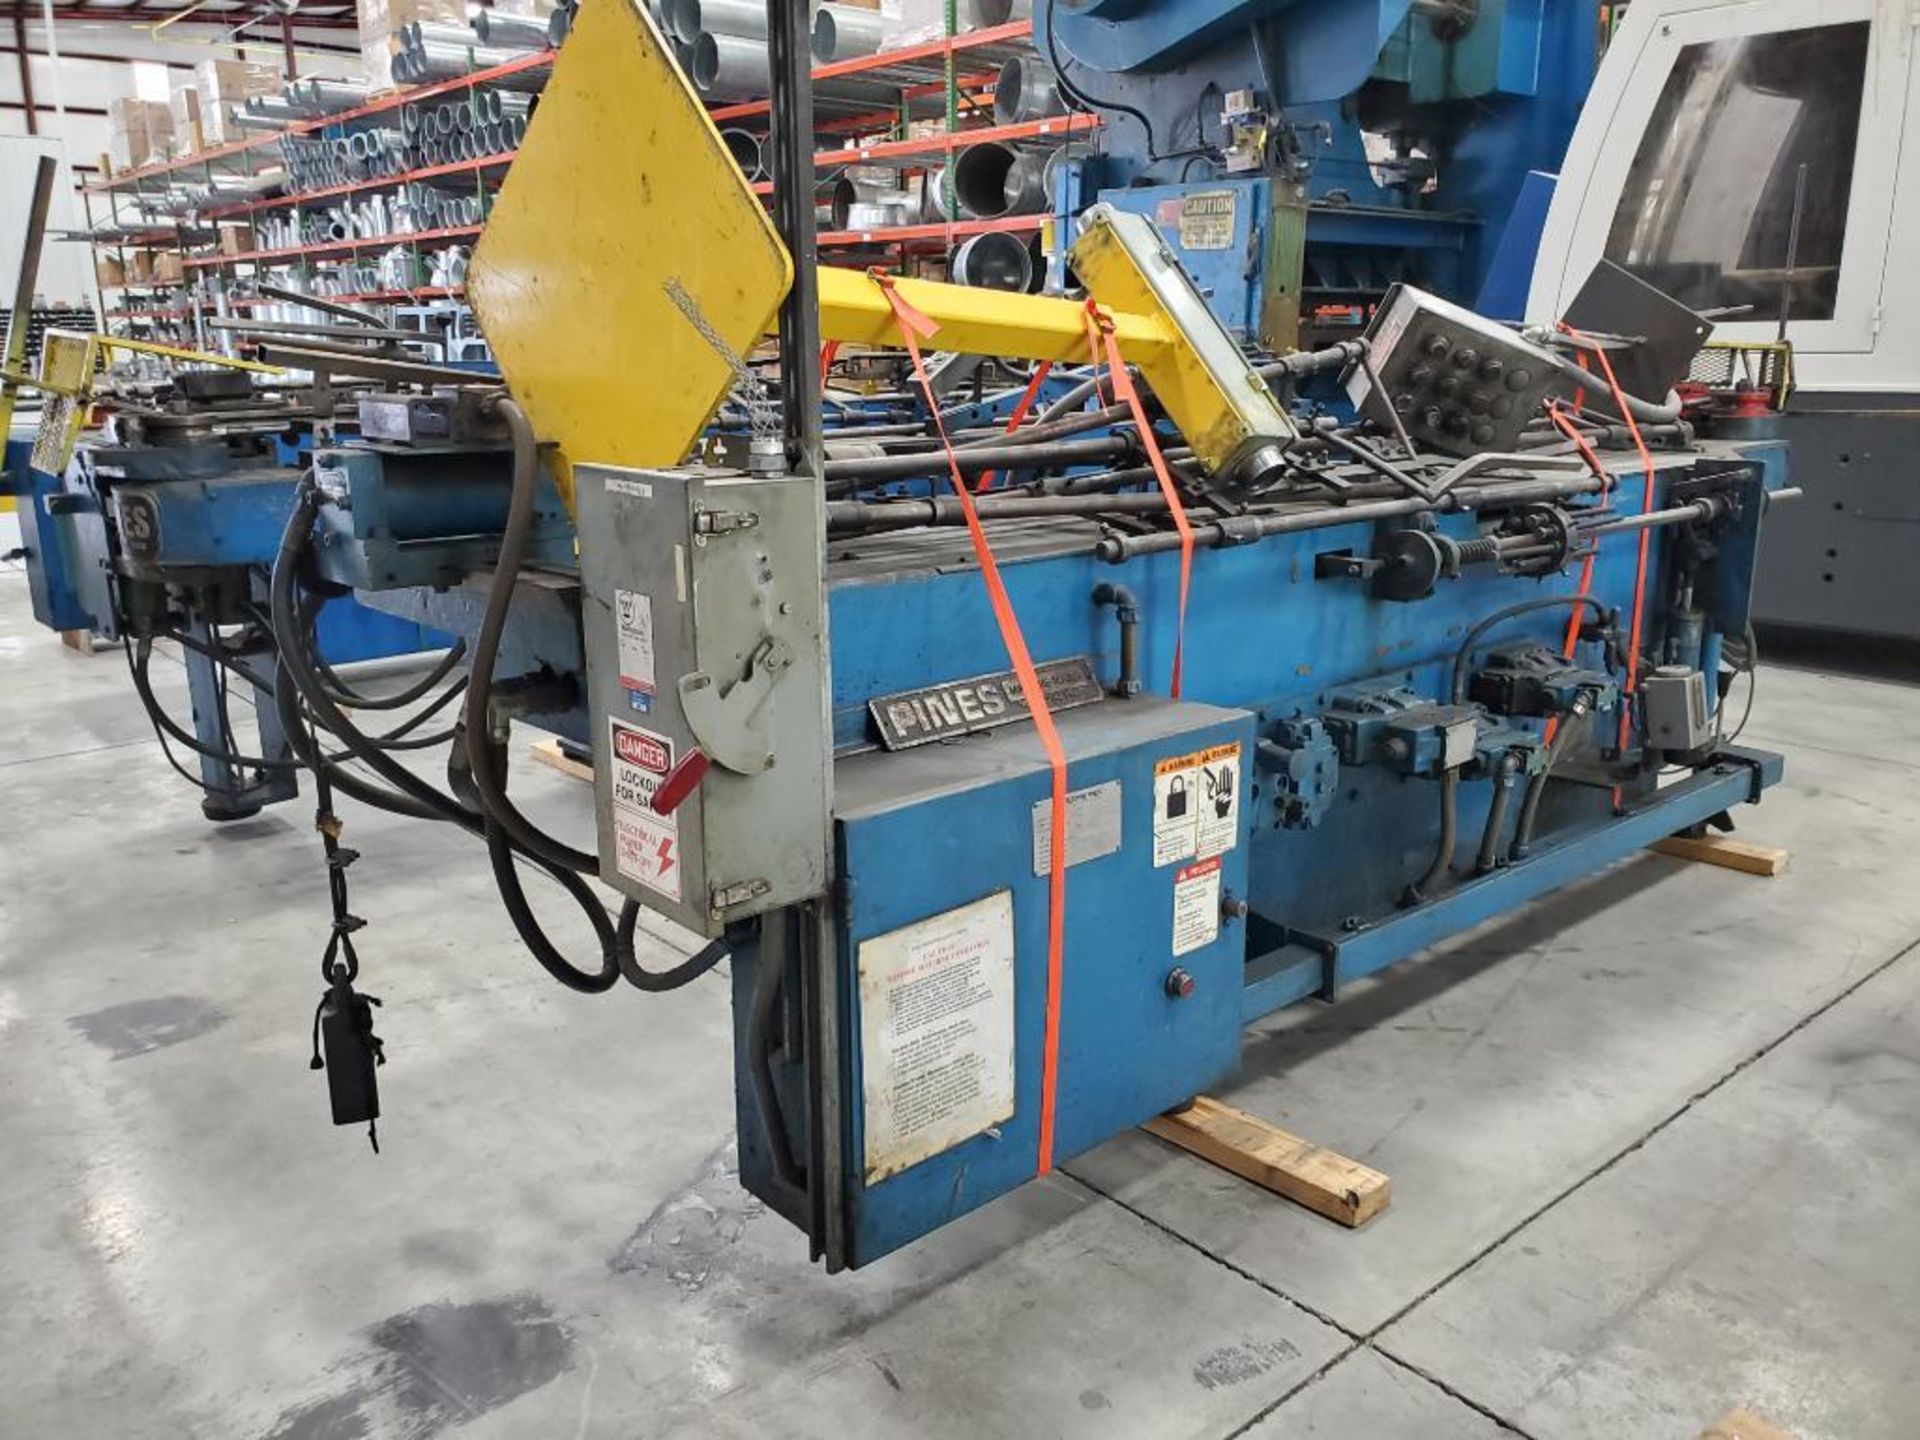 Teledyne Pines Hydraulic Tube Bender, S/N 1021A-72311, Pines Go# M24S38 - Image 5 of 10